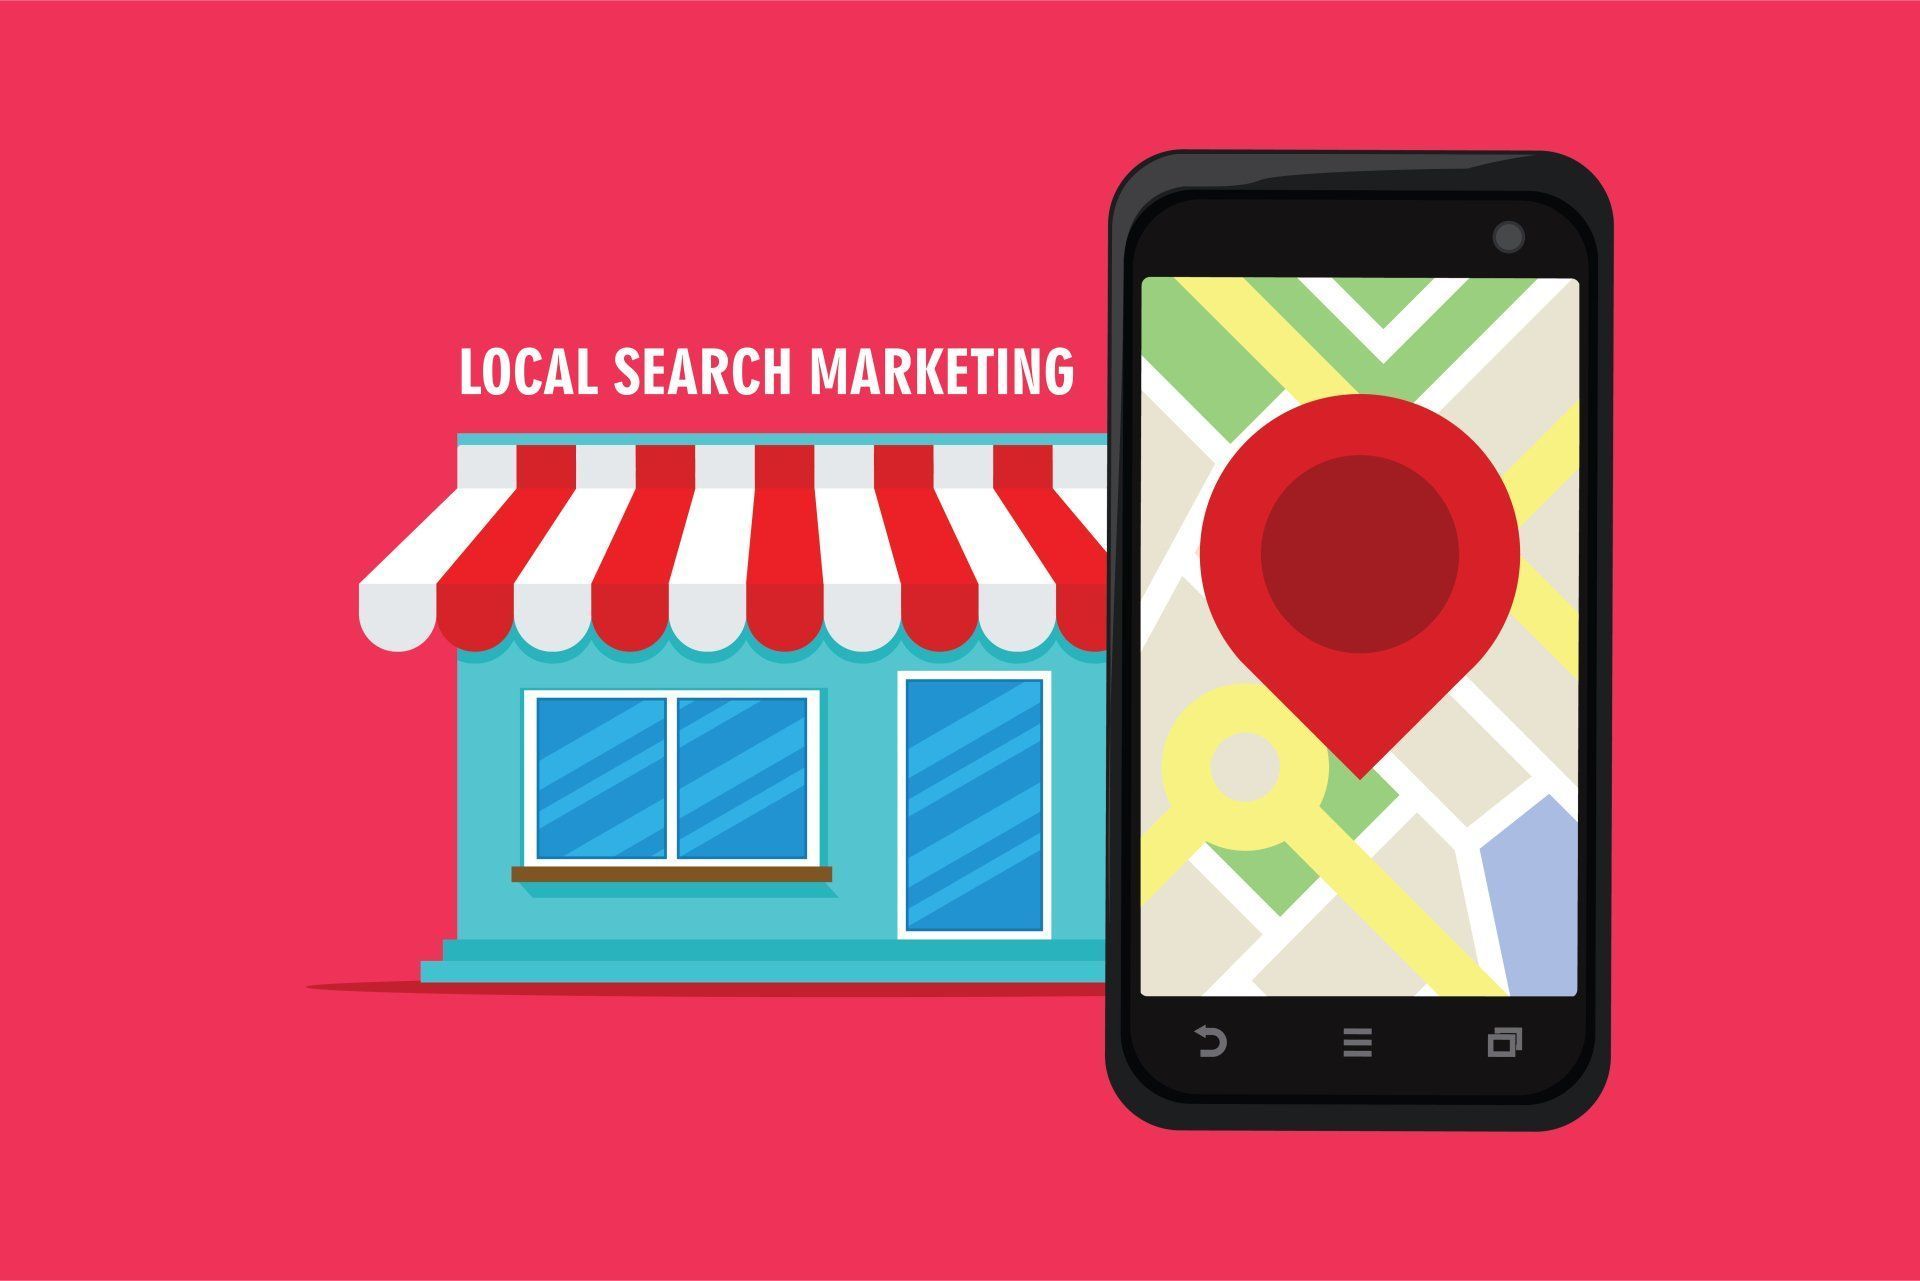 Google Business Profile Graphic - Highlighting Local SEO